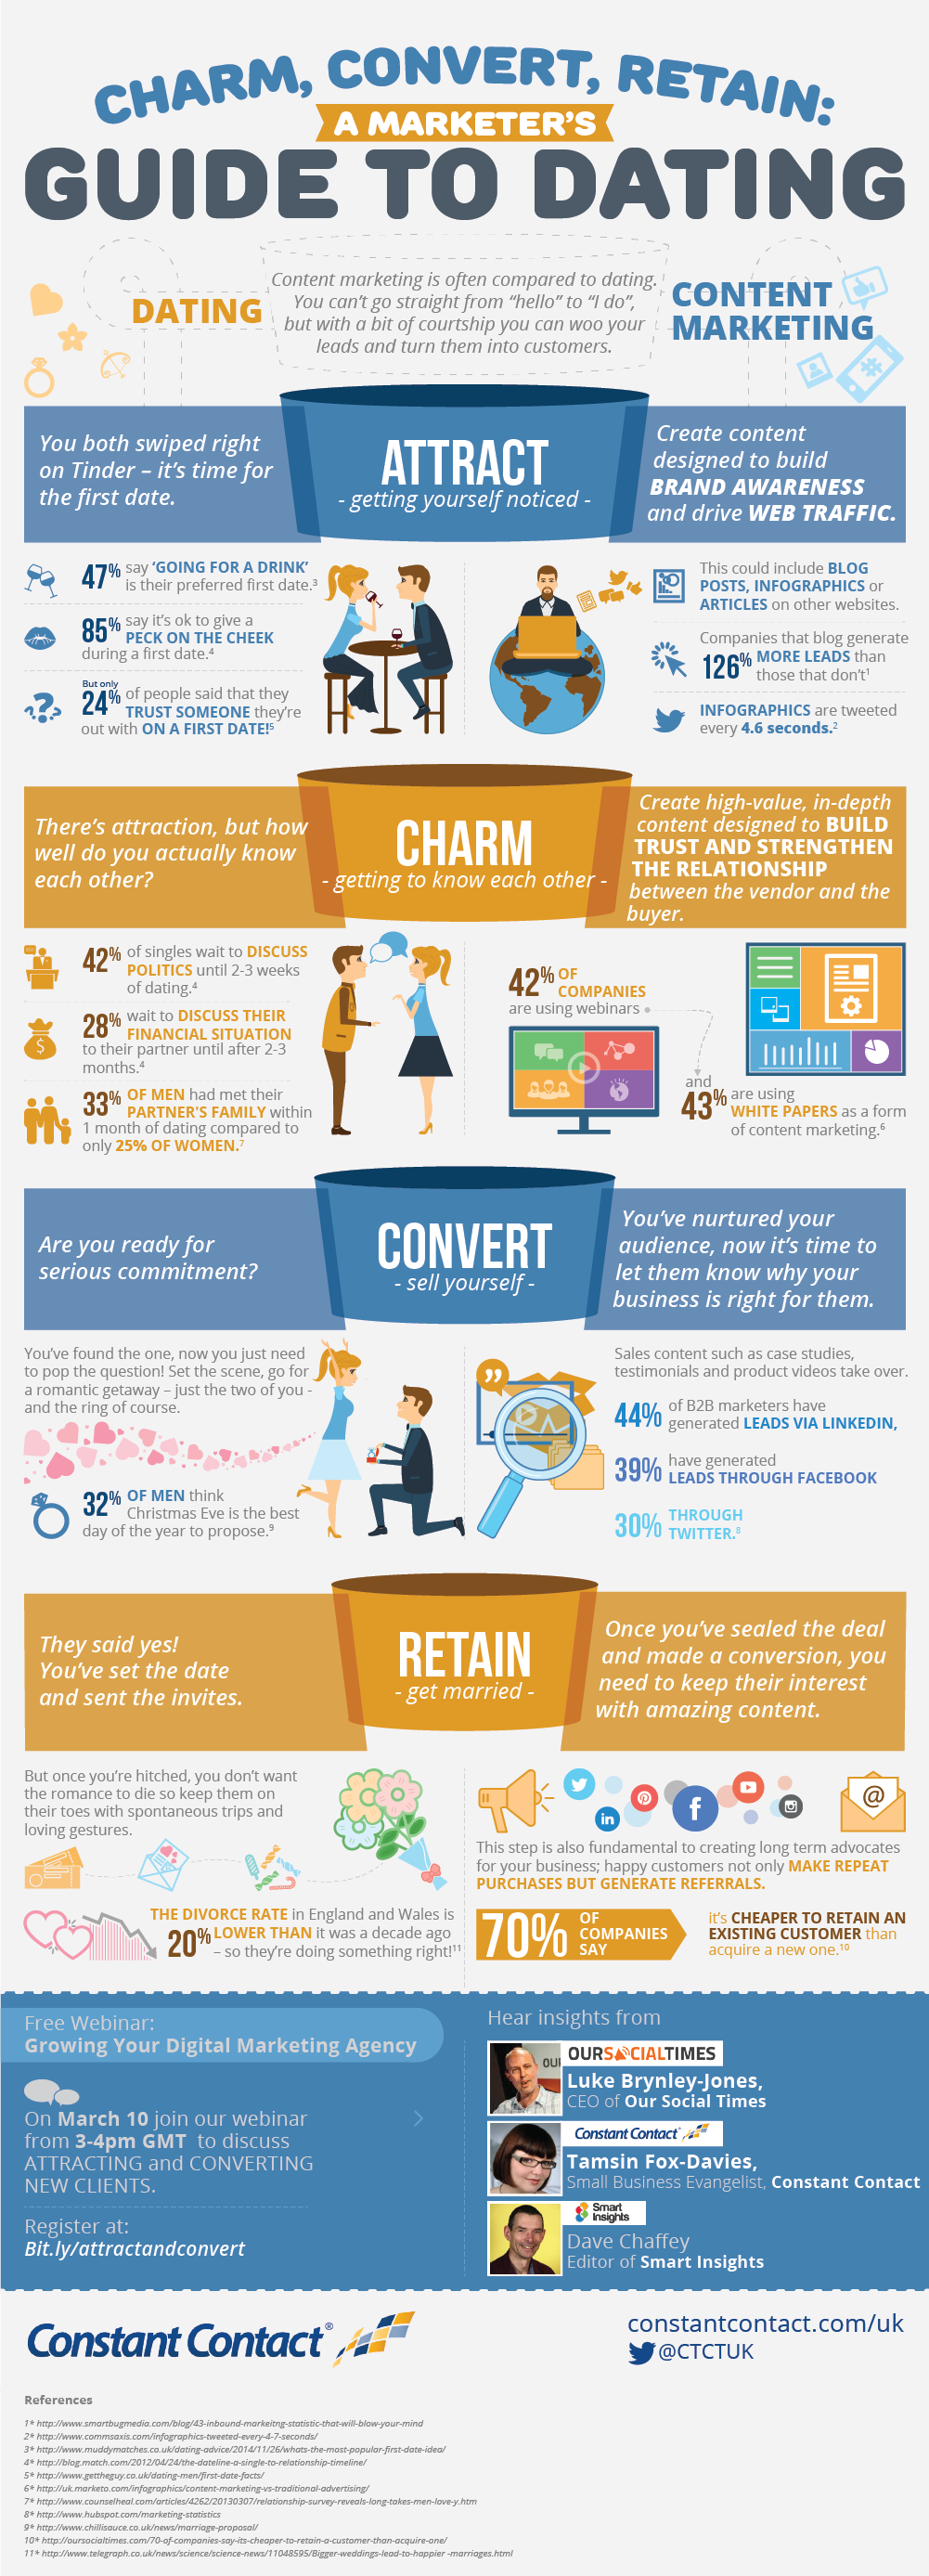 What Content Marketers Can Learn From Dating - #infographic #contentmarketing